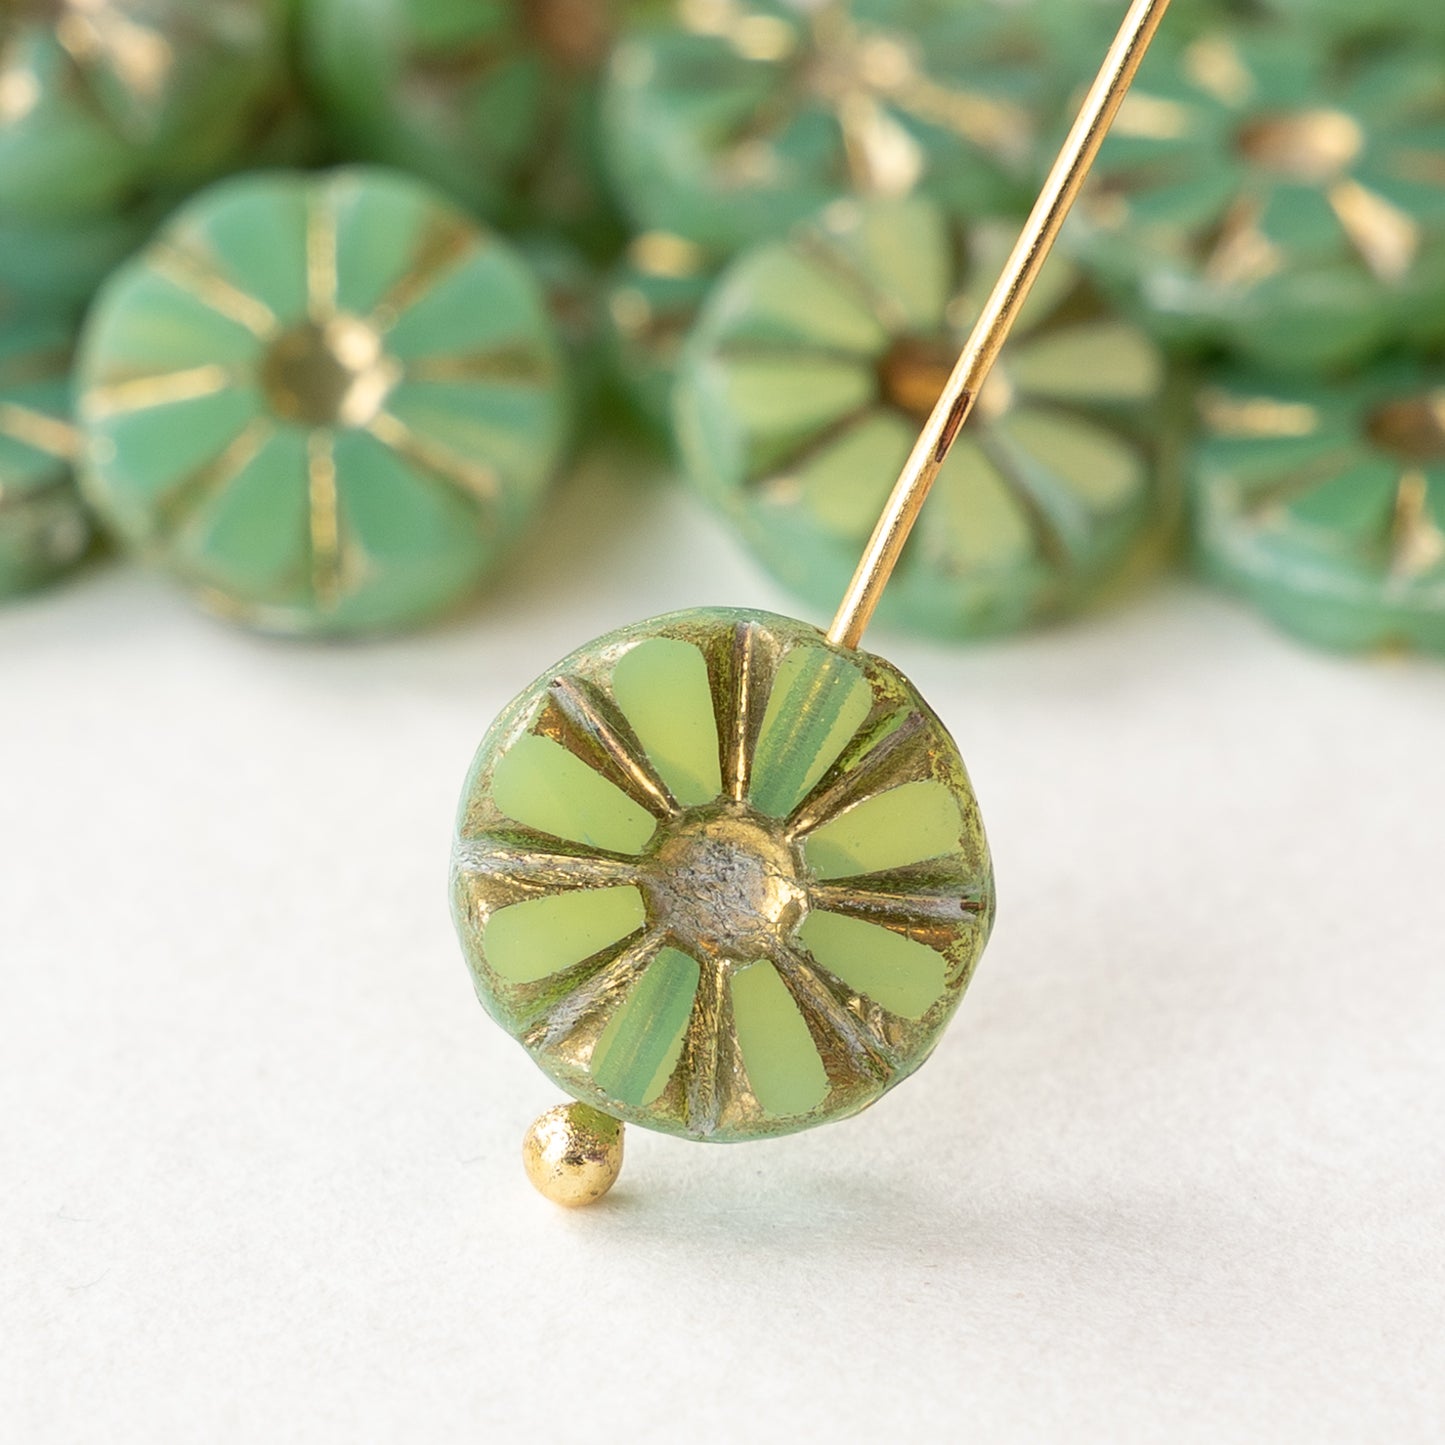 Load image into Gallery viewer, 12mm Sunflower Coin Beads - Seafoam with Gold Wash - 10 or 30 Beads
